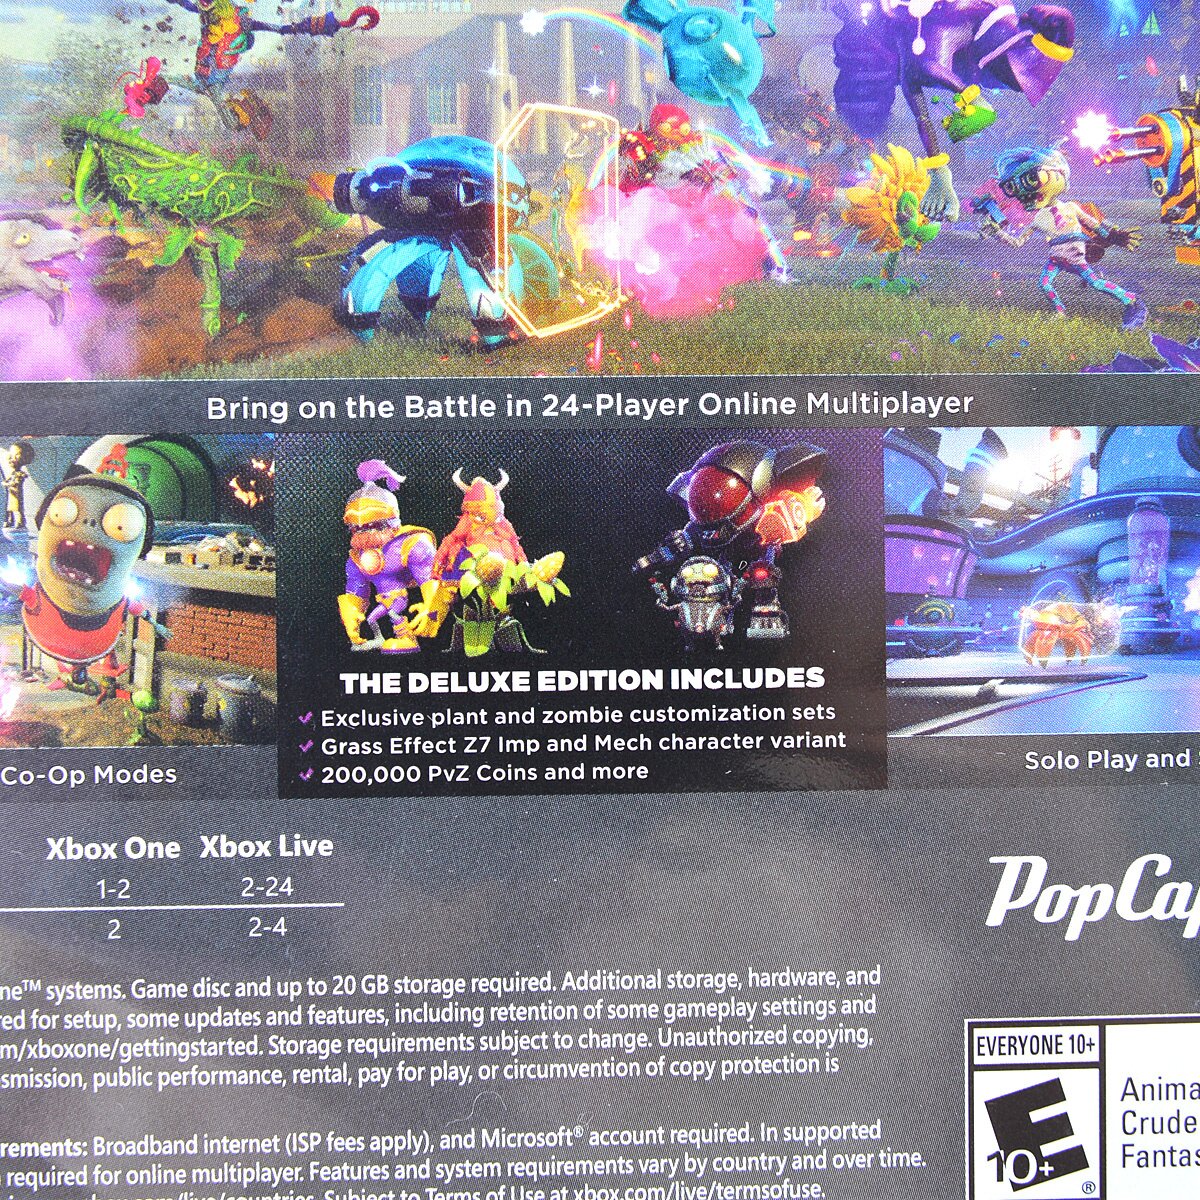 Play Plants vs. Zombies Garden Warfare 2 – Free for a Limited Time